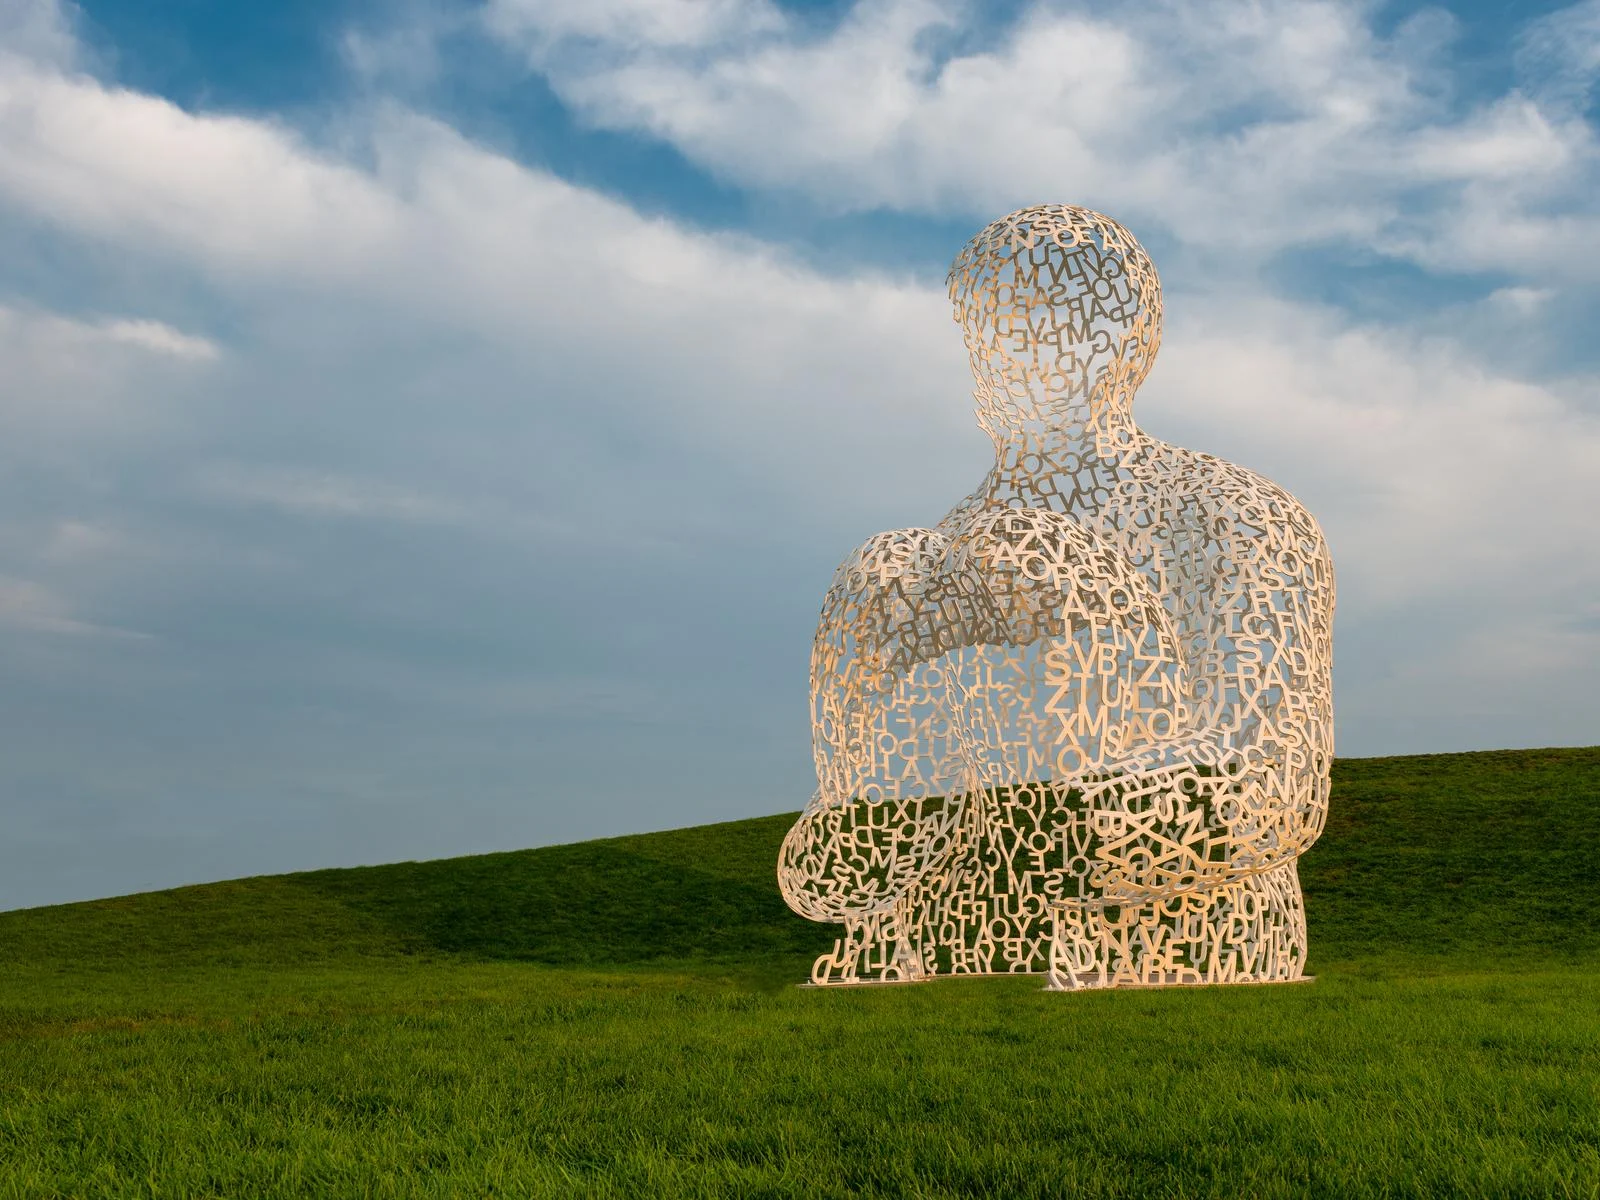 An abstract sculpture of a man in squatting position formed from connected letters entitled Nomad by Jaume Plensa, our pick for what to see in Iowa, at Pappajohn Sculpture Park